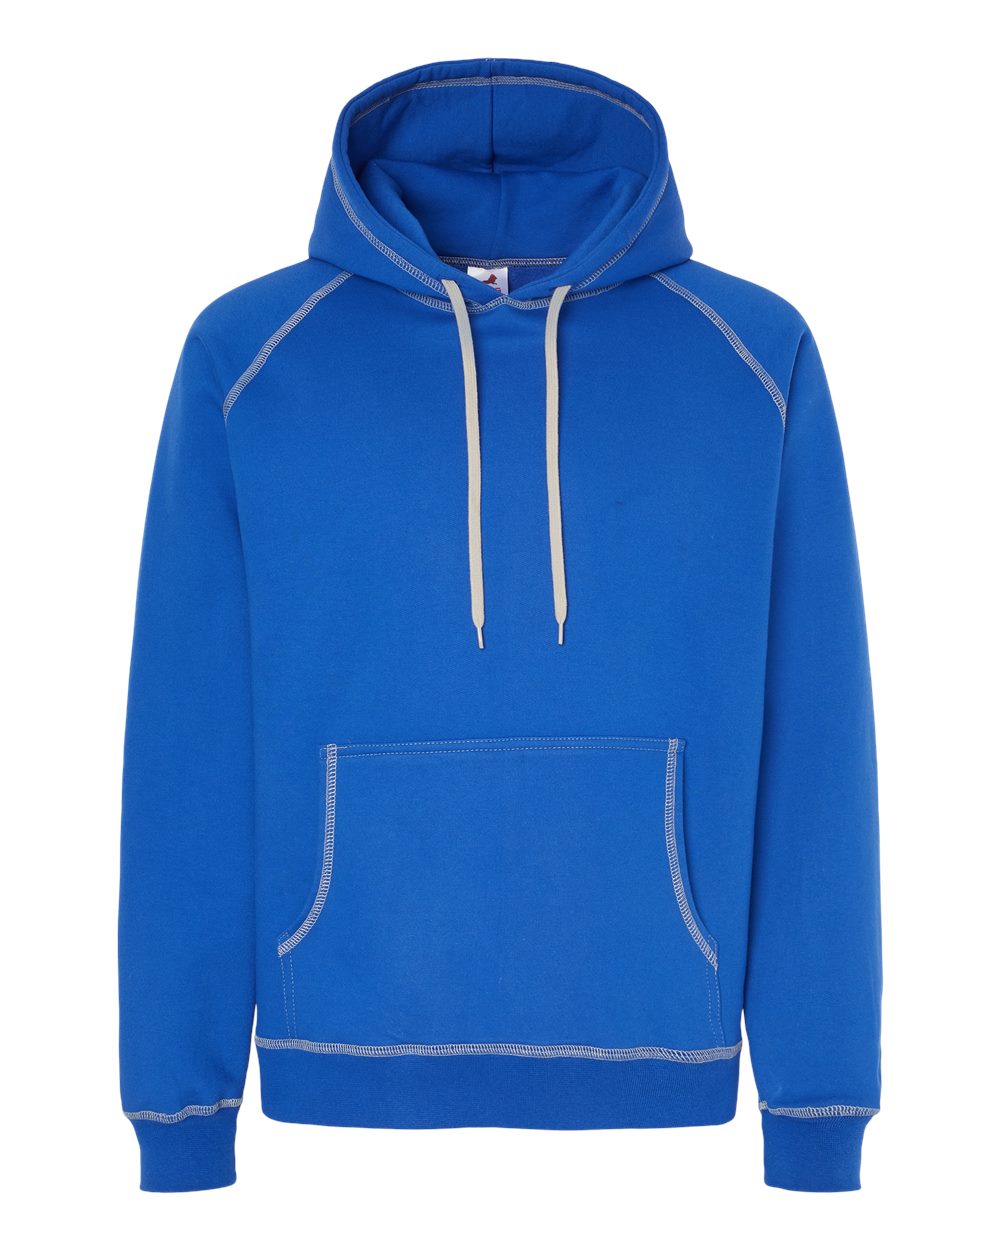 King Fashion Extra Heavy Hooded Pullover KP8011 #color_Royal Blue